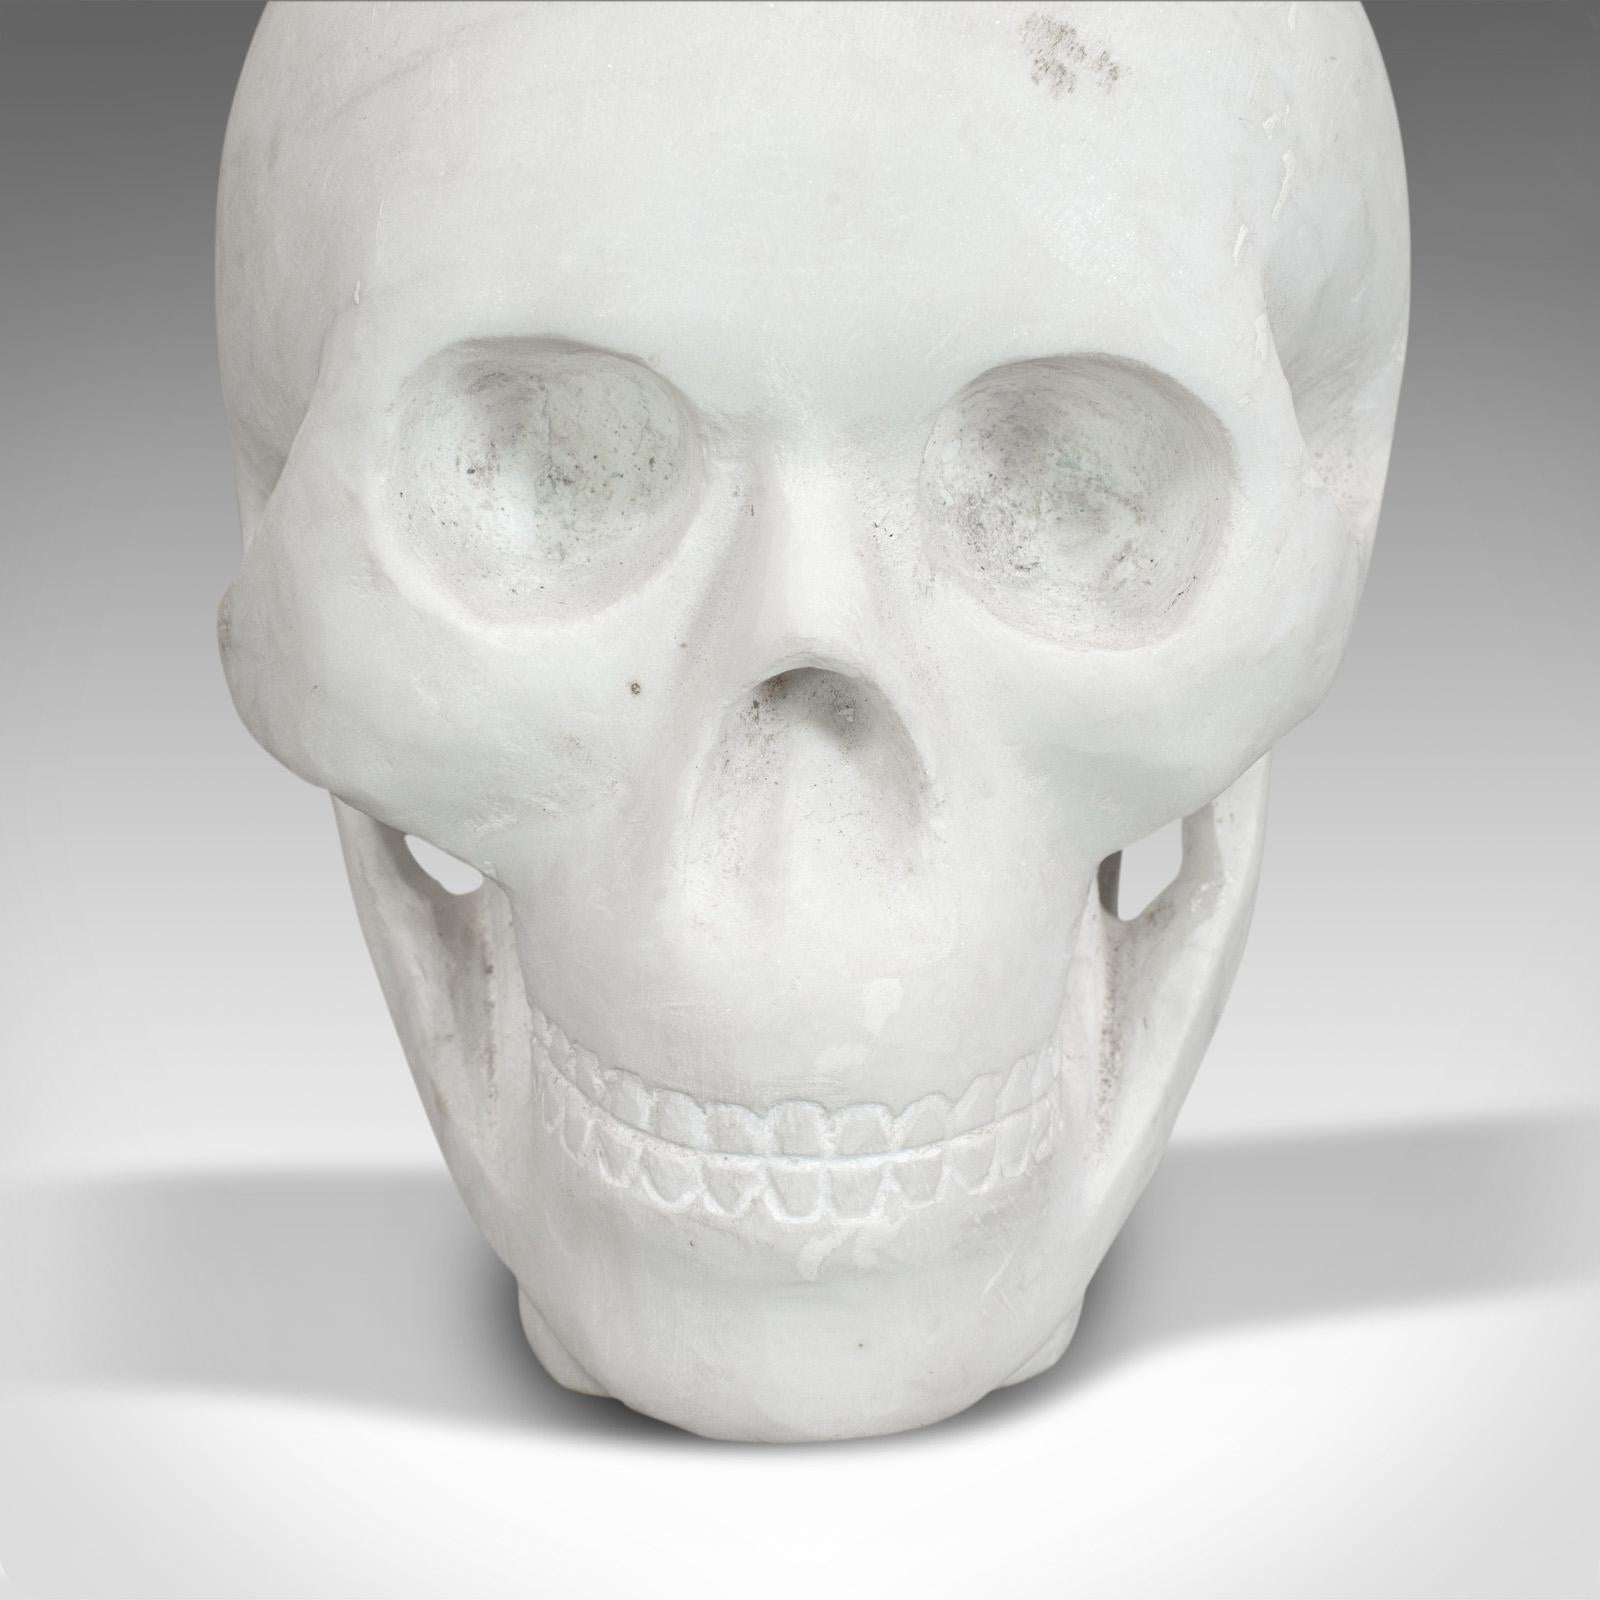 Vintage Decorative Skull, English, White Marble, Desk, Ornament, Paperweight For Sale 4